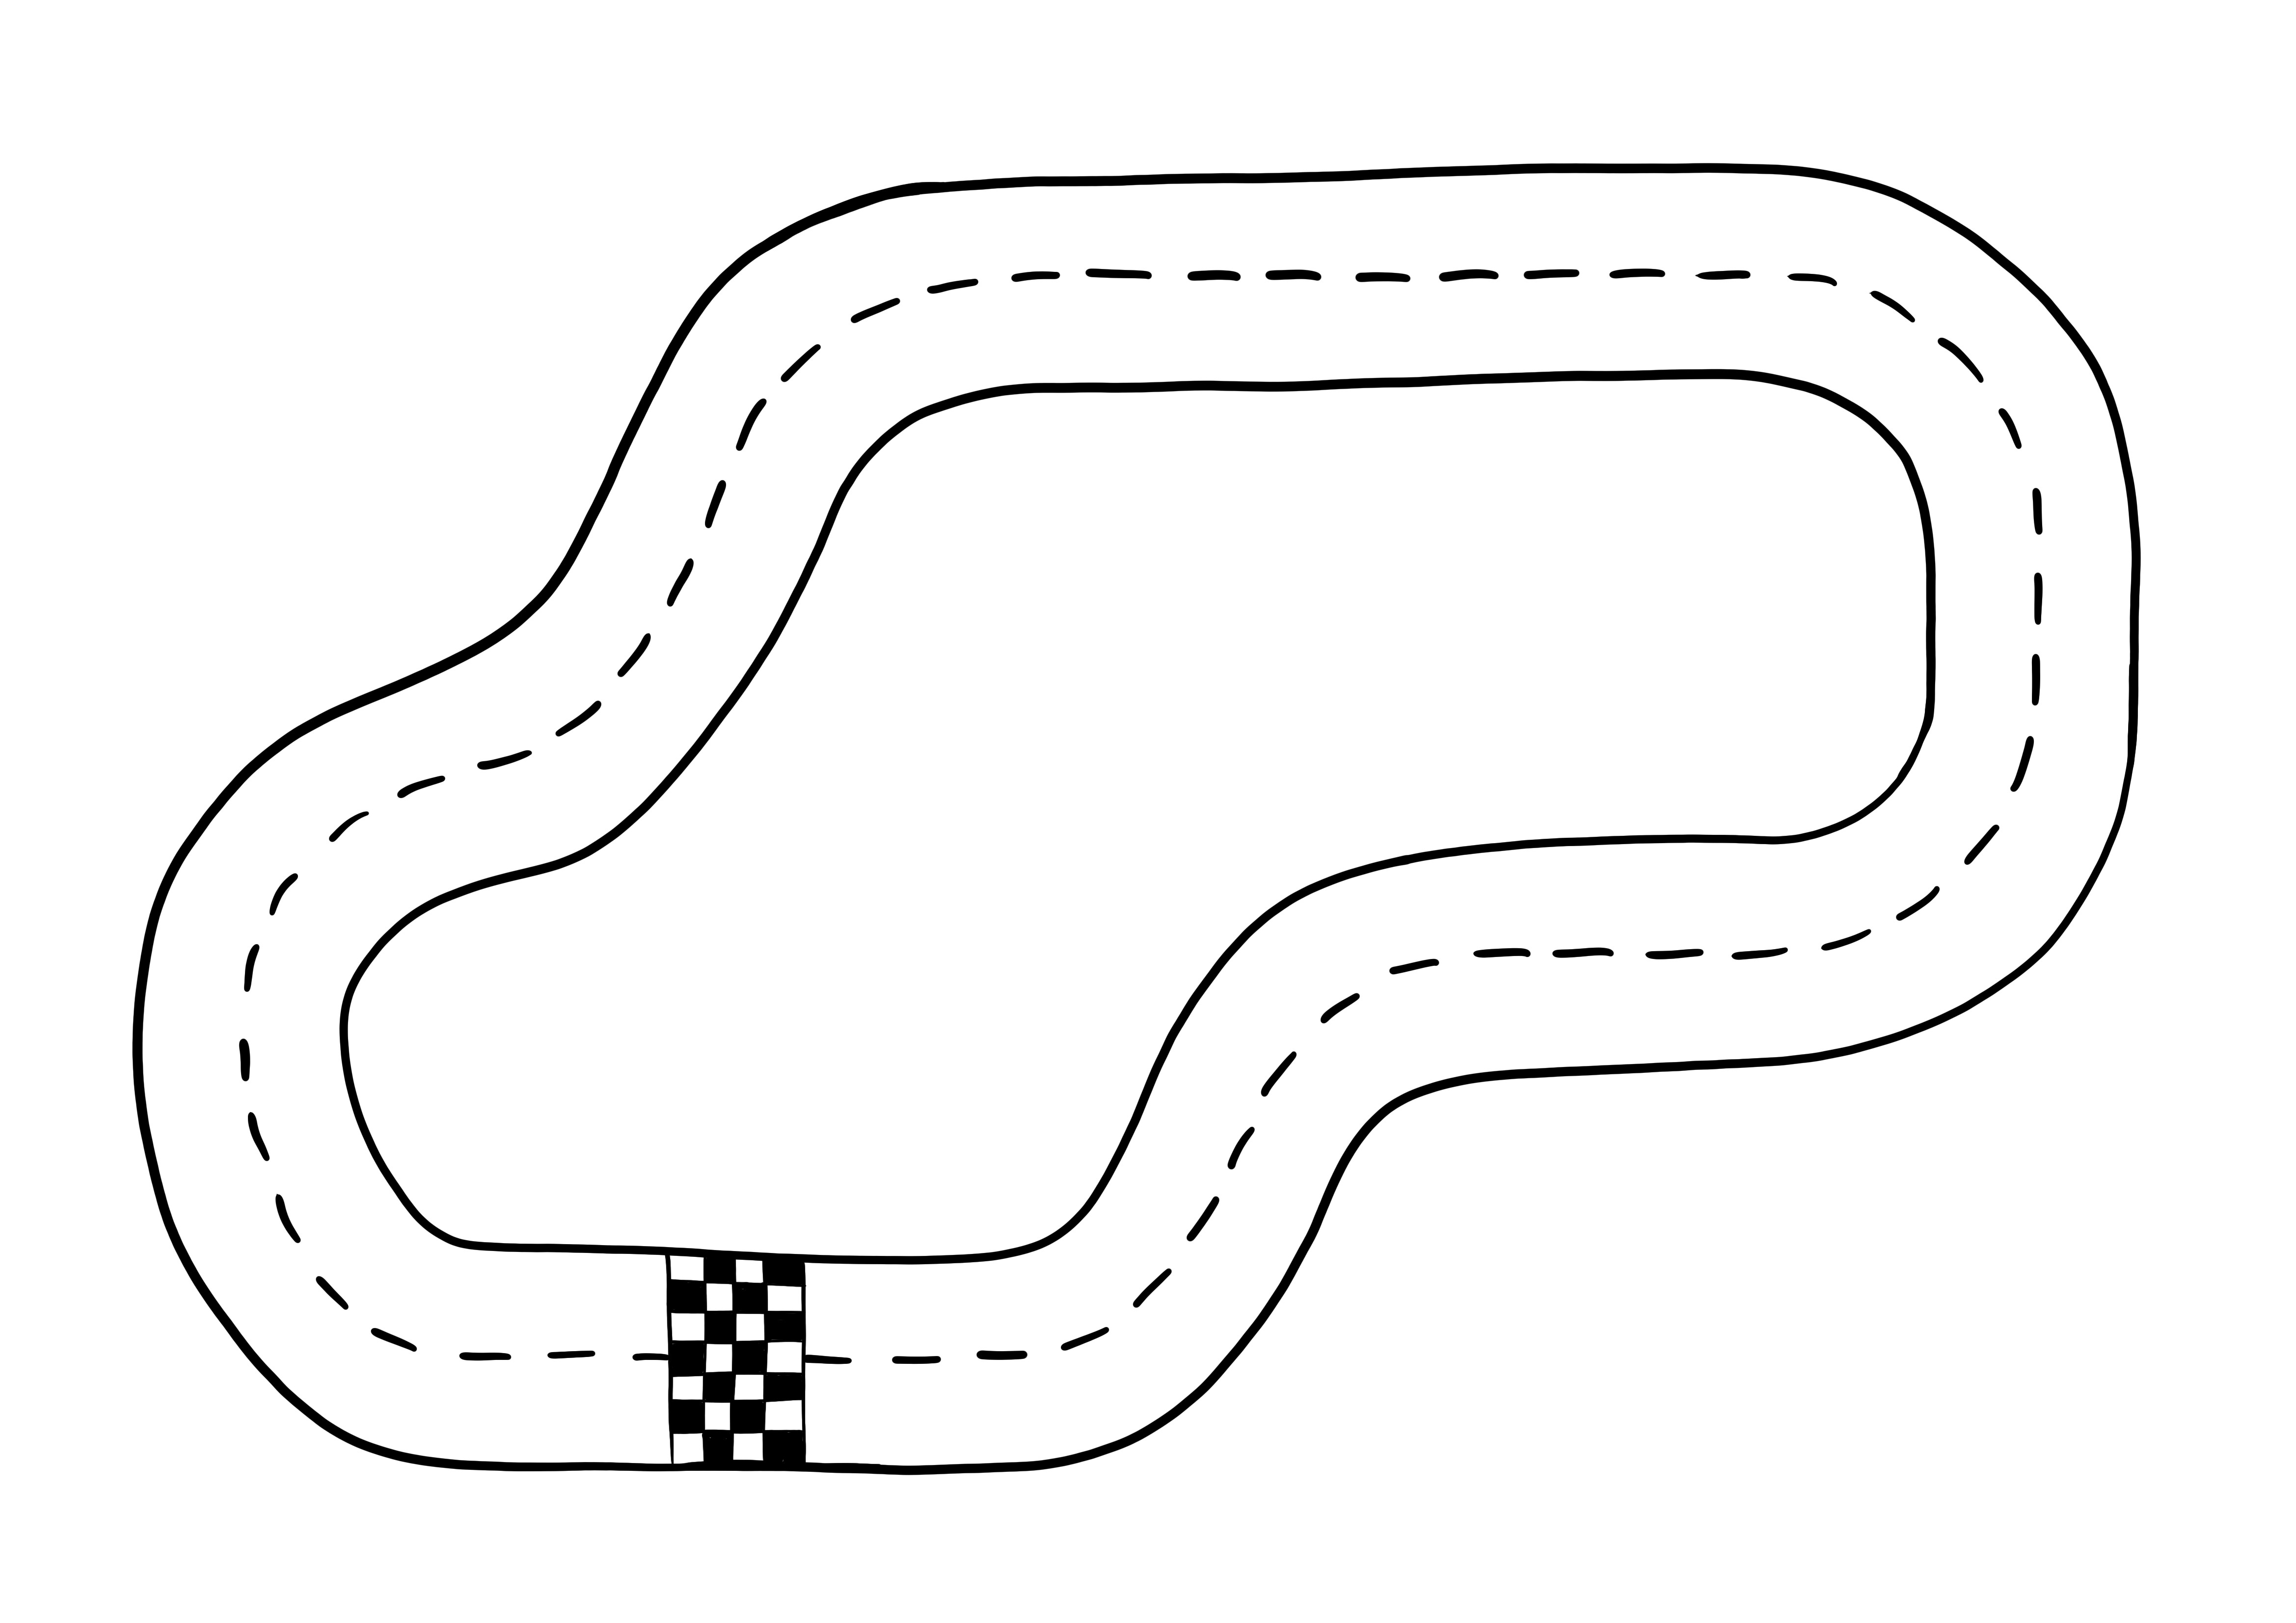 Racing track sample to color and print for free for kids